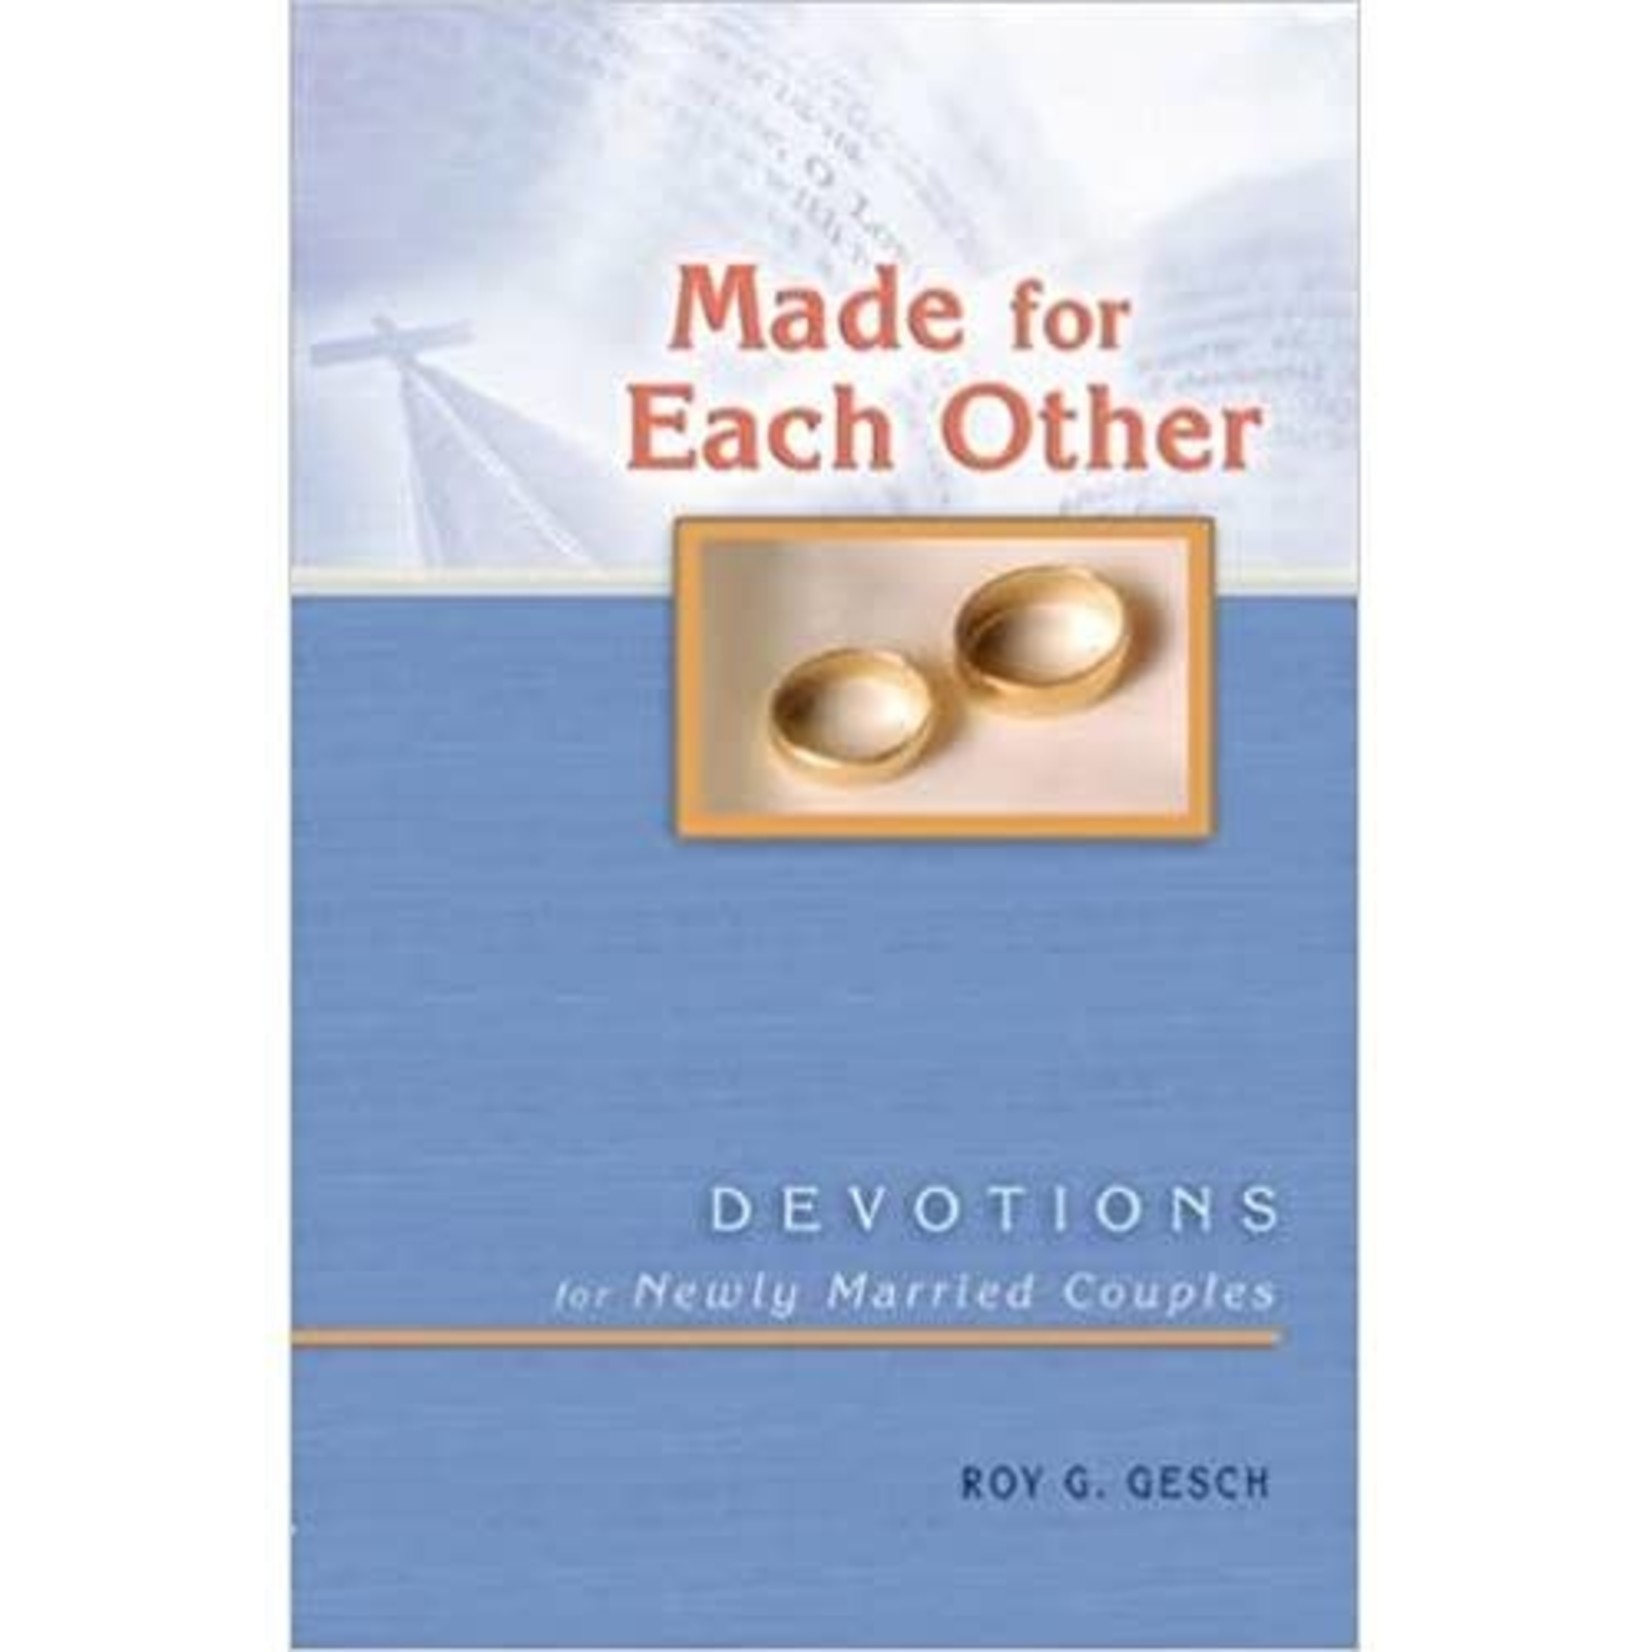 Made for Each Other - Devotions for Newly Married Couples